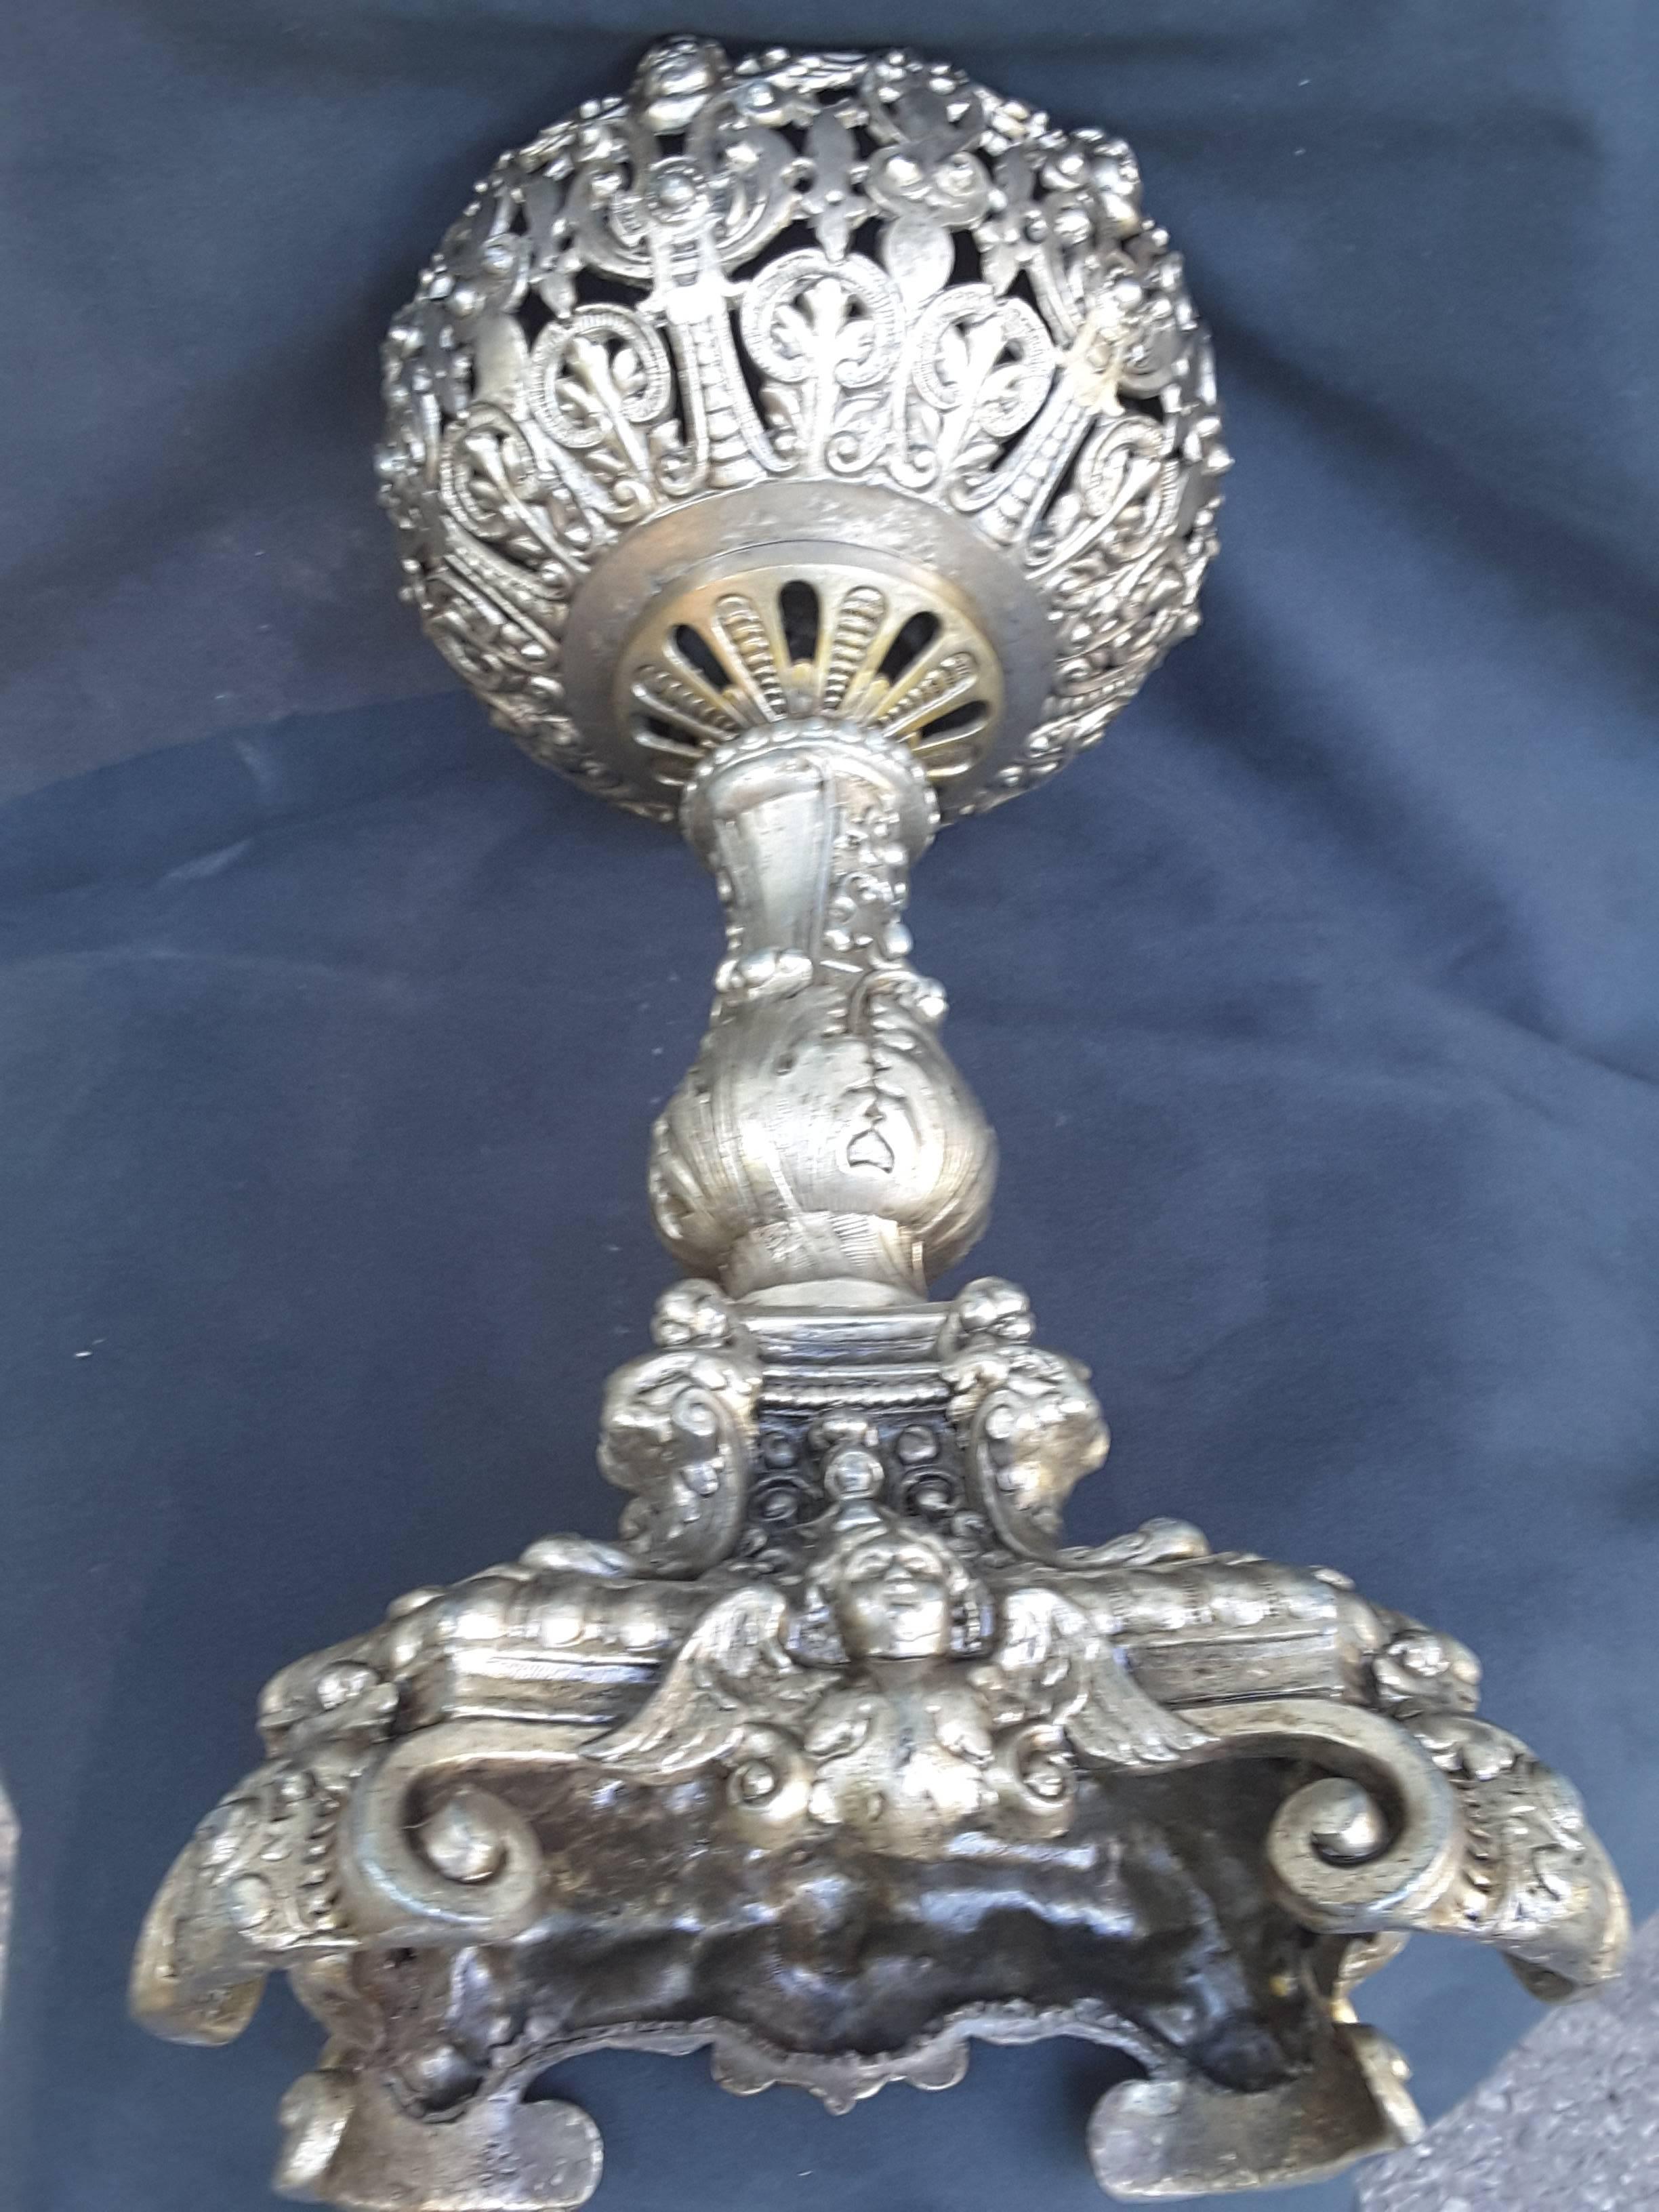 Angel Face Oil Lamp Silver Tone Finish Scrolled Foot & Acanthus Leaf Decoration 1